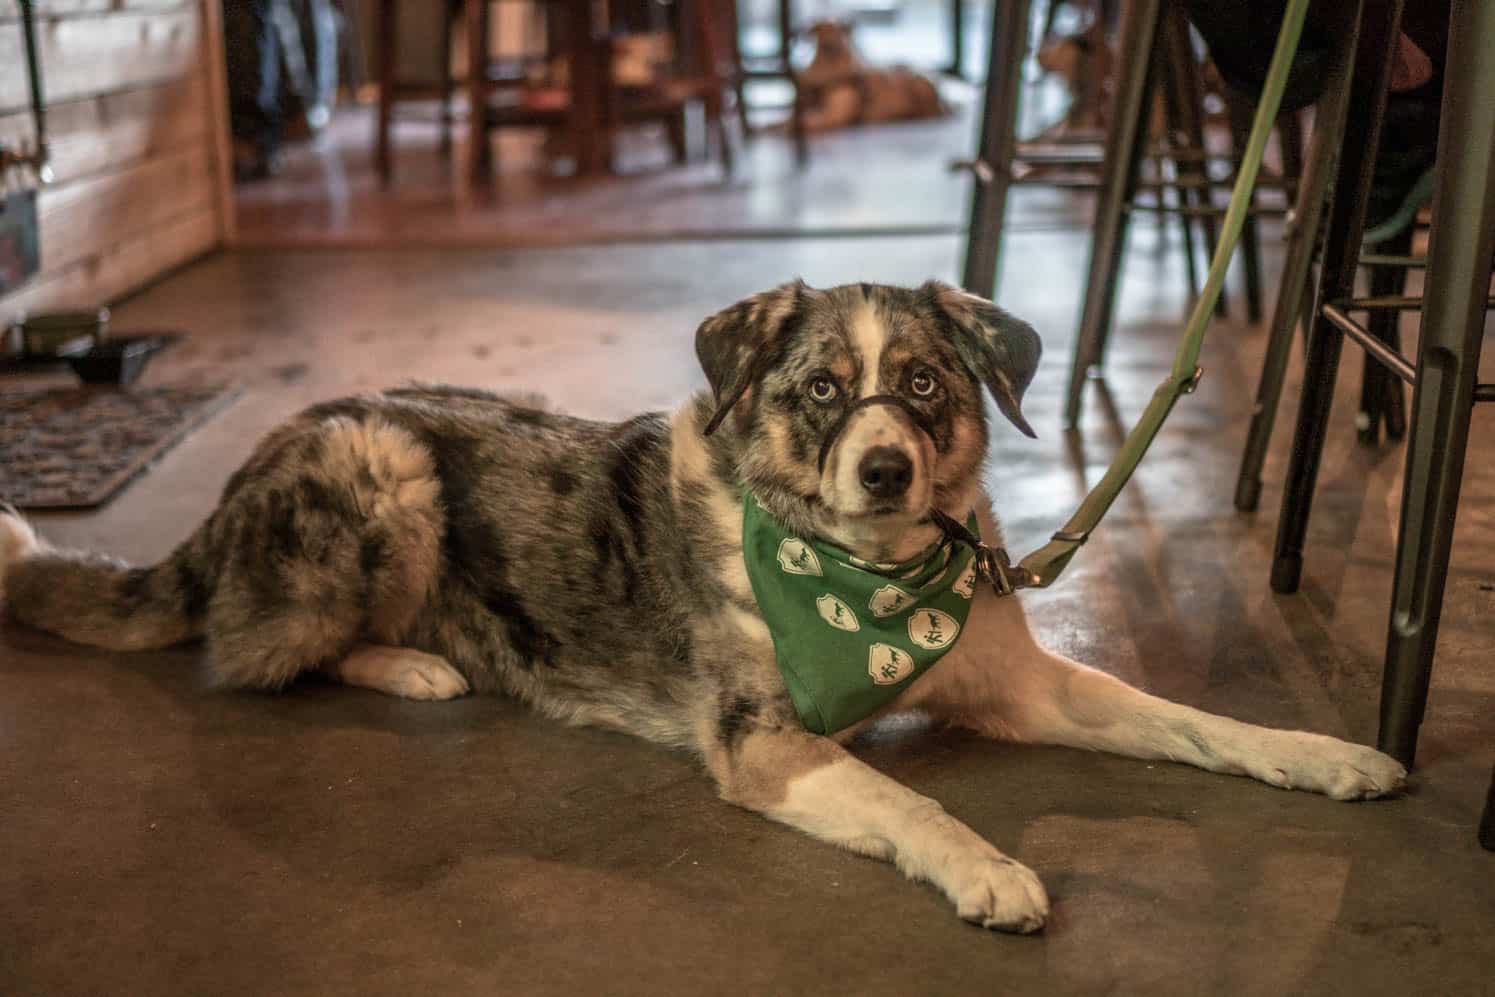 In the city that has more dogs than kids, it's no wonder that several Seattle-area eateries allow dogs inside.